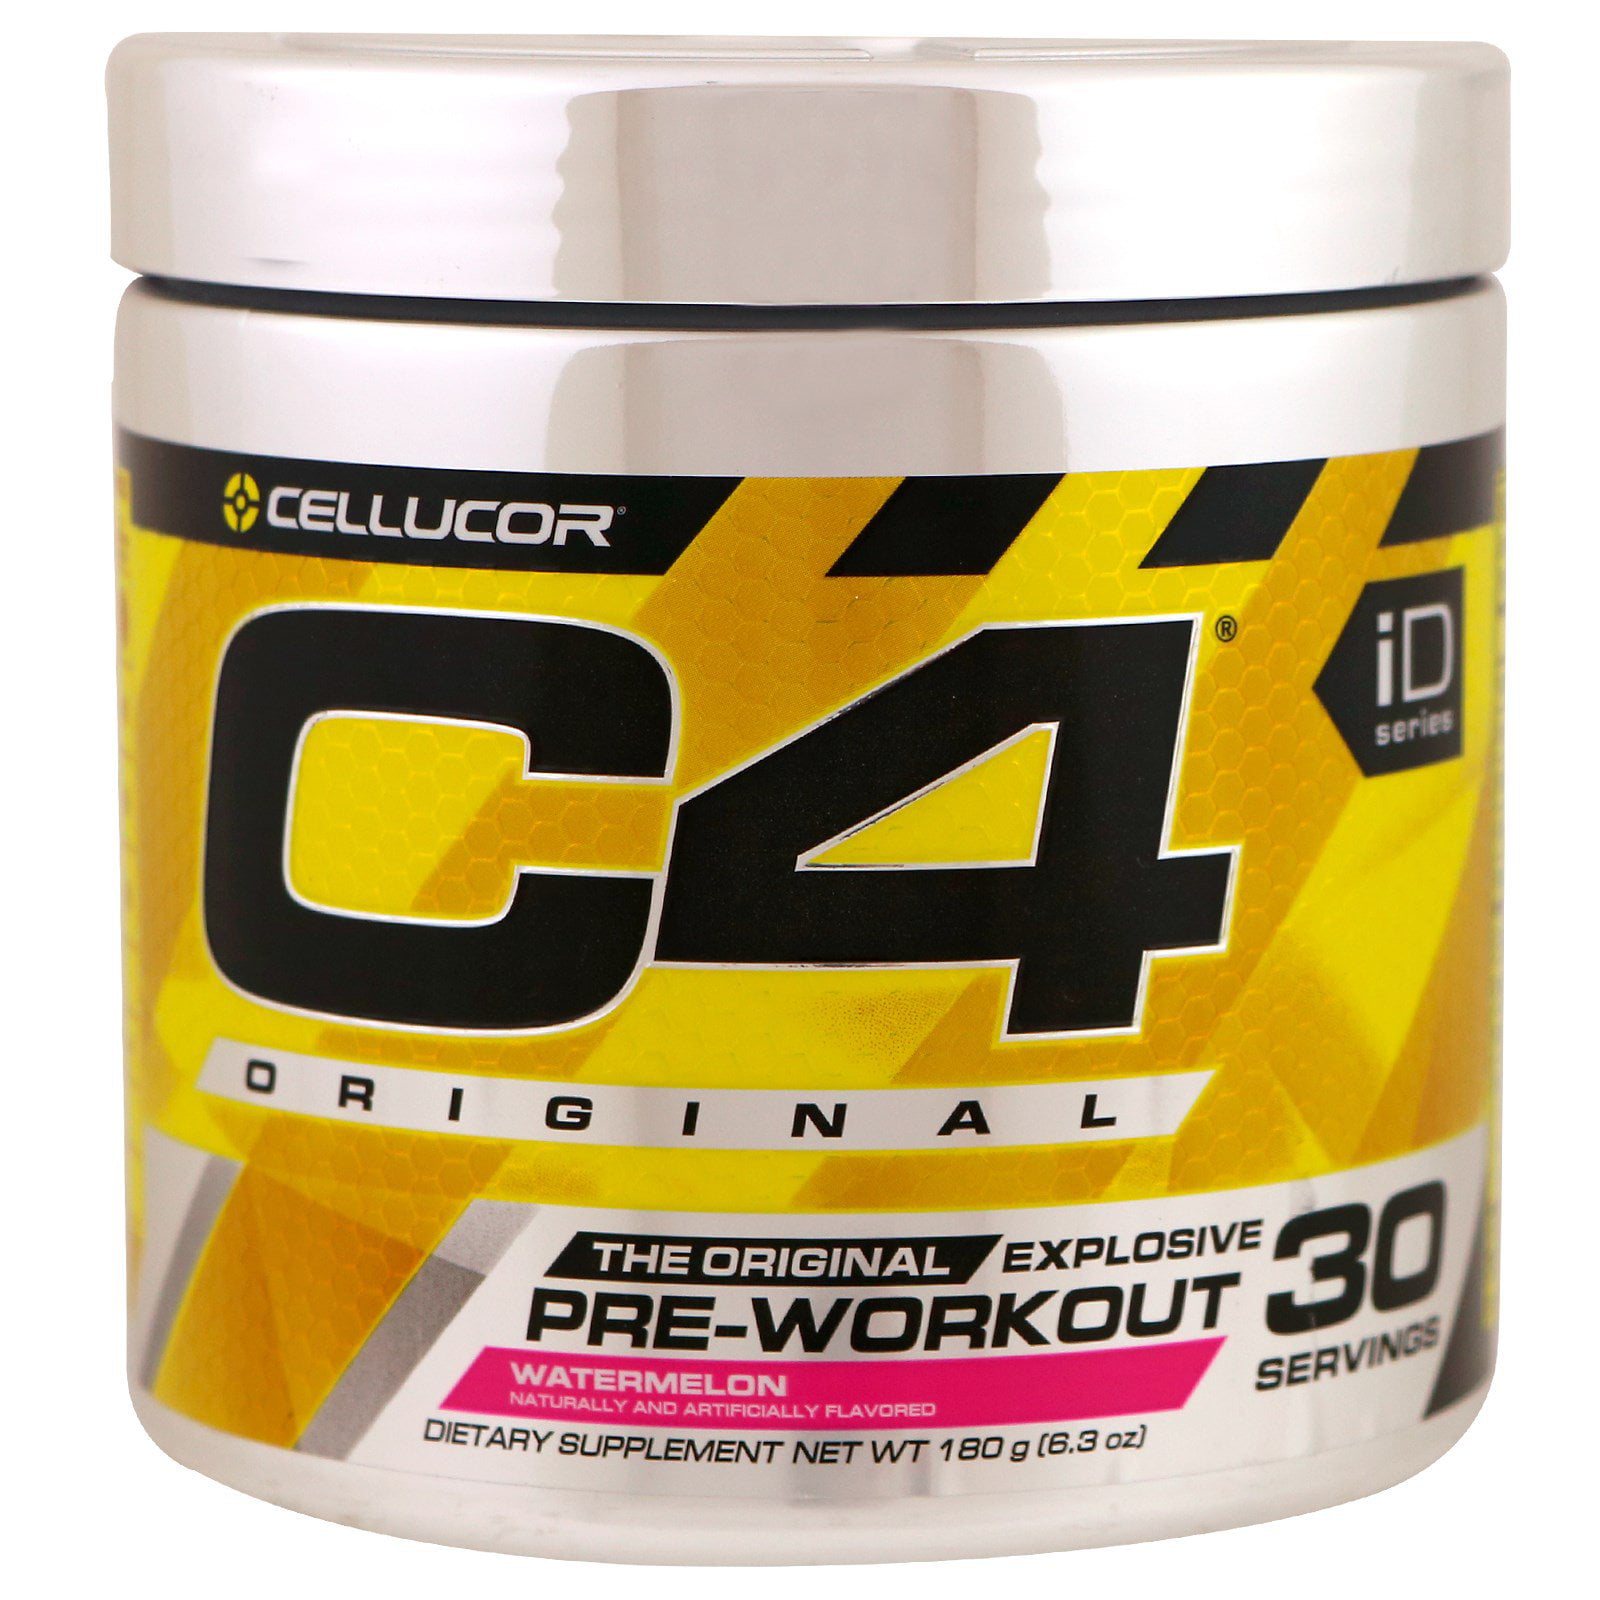  C4 Pre Workout Ingredients Caffeine for Fat Body